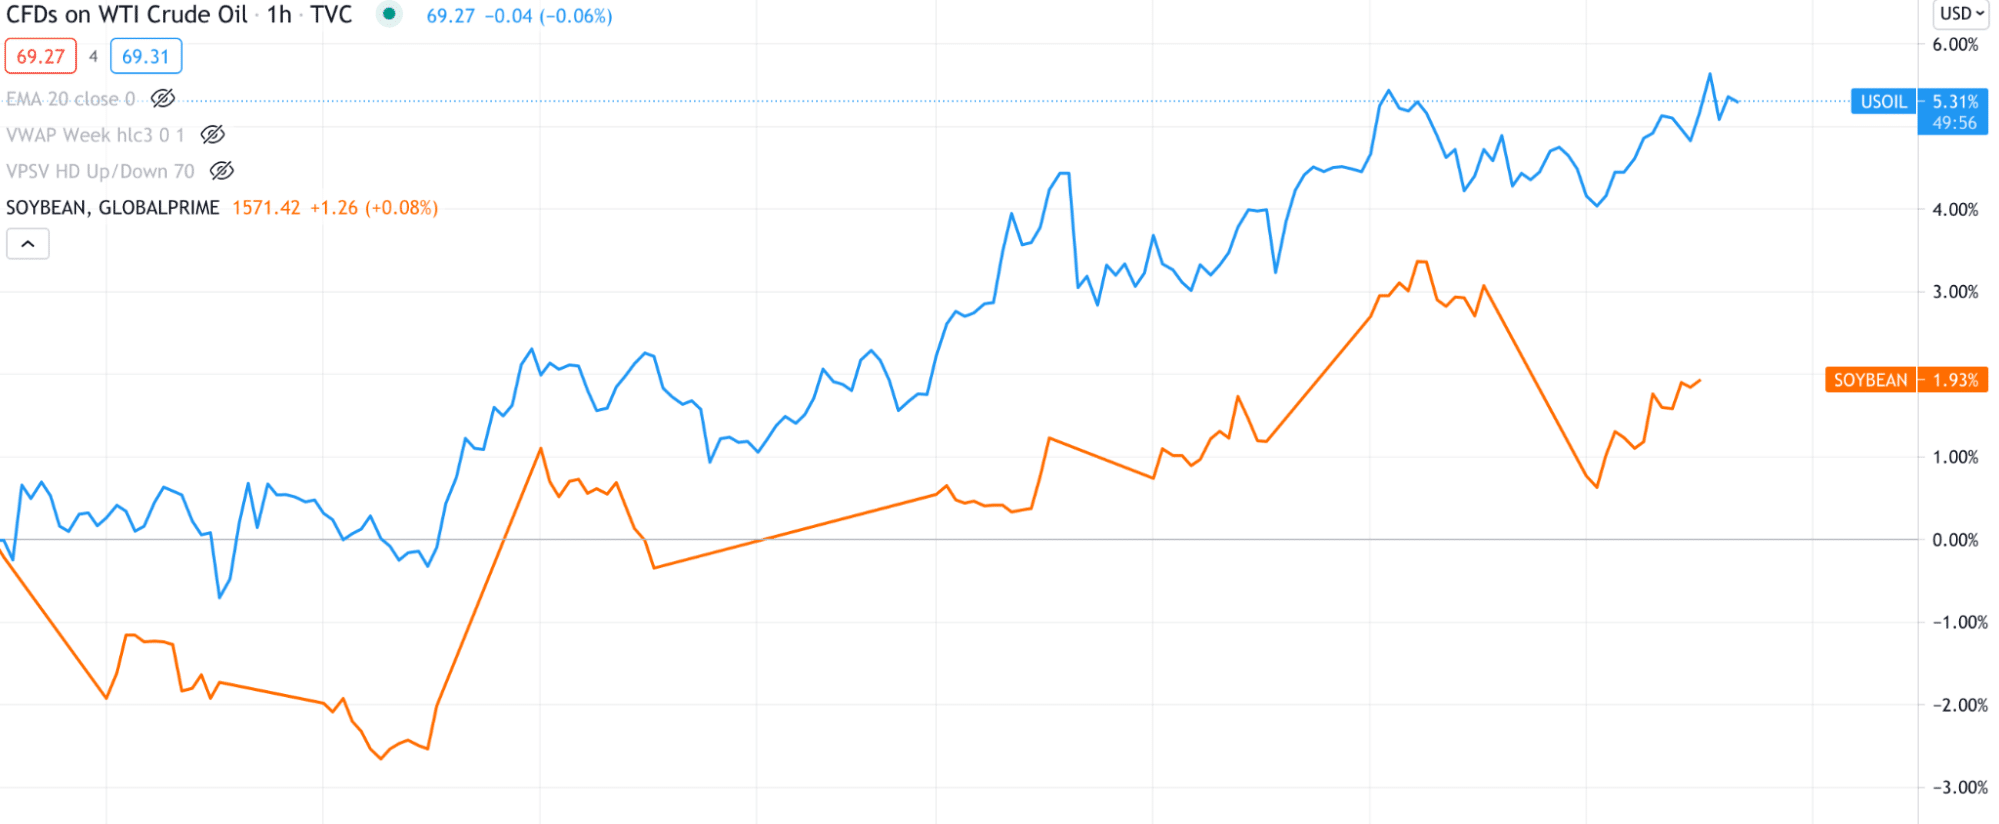 The image shows the price comparison between soybean and crude oil.